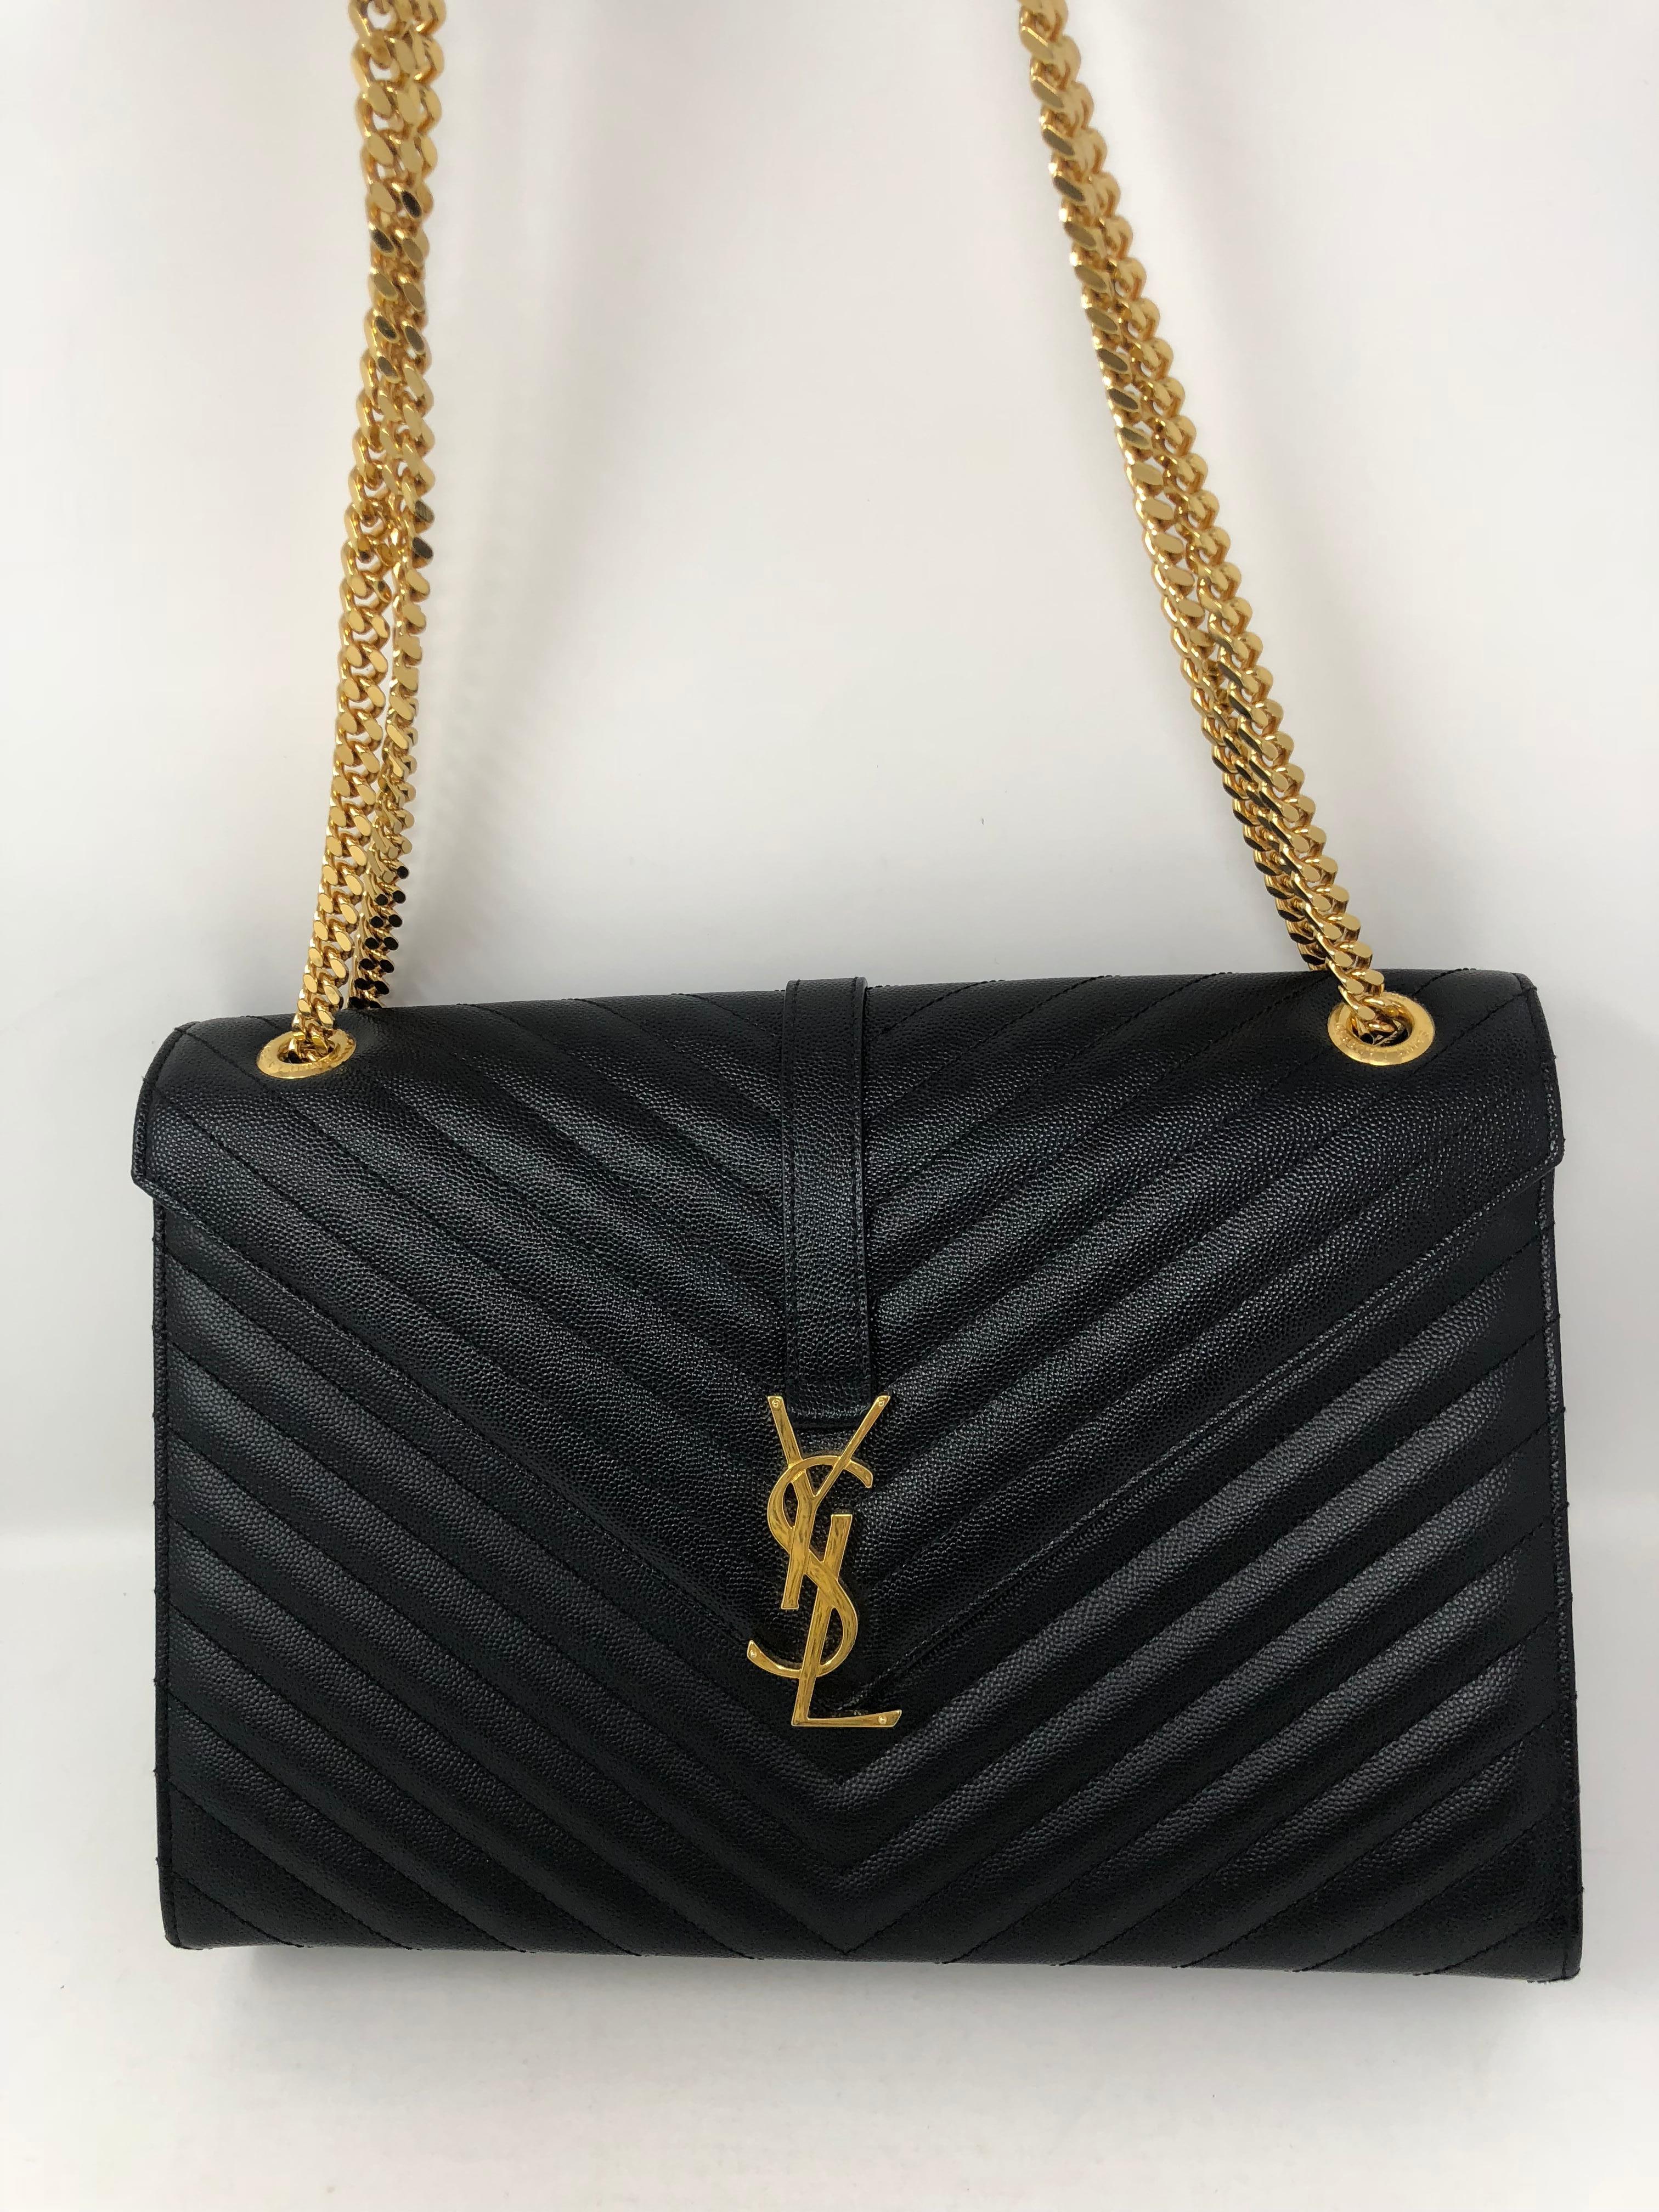 Black YSL Bag with gold hardware. Like new condition. Worn once. Shiny gold hardware in mint condition. Can be worn longer or doubled strap. Guaranteed authentic.